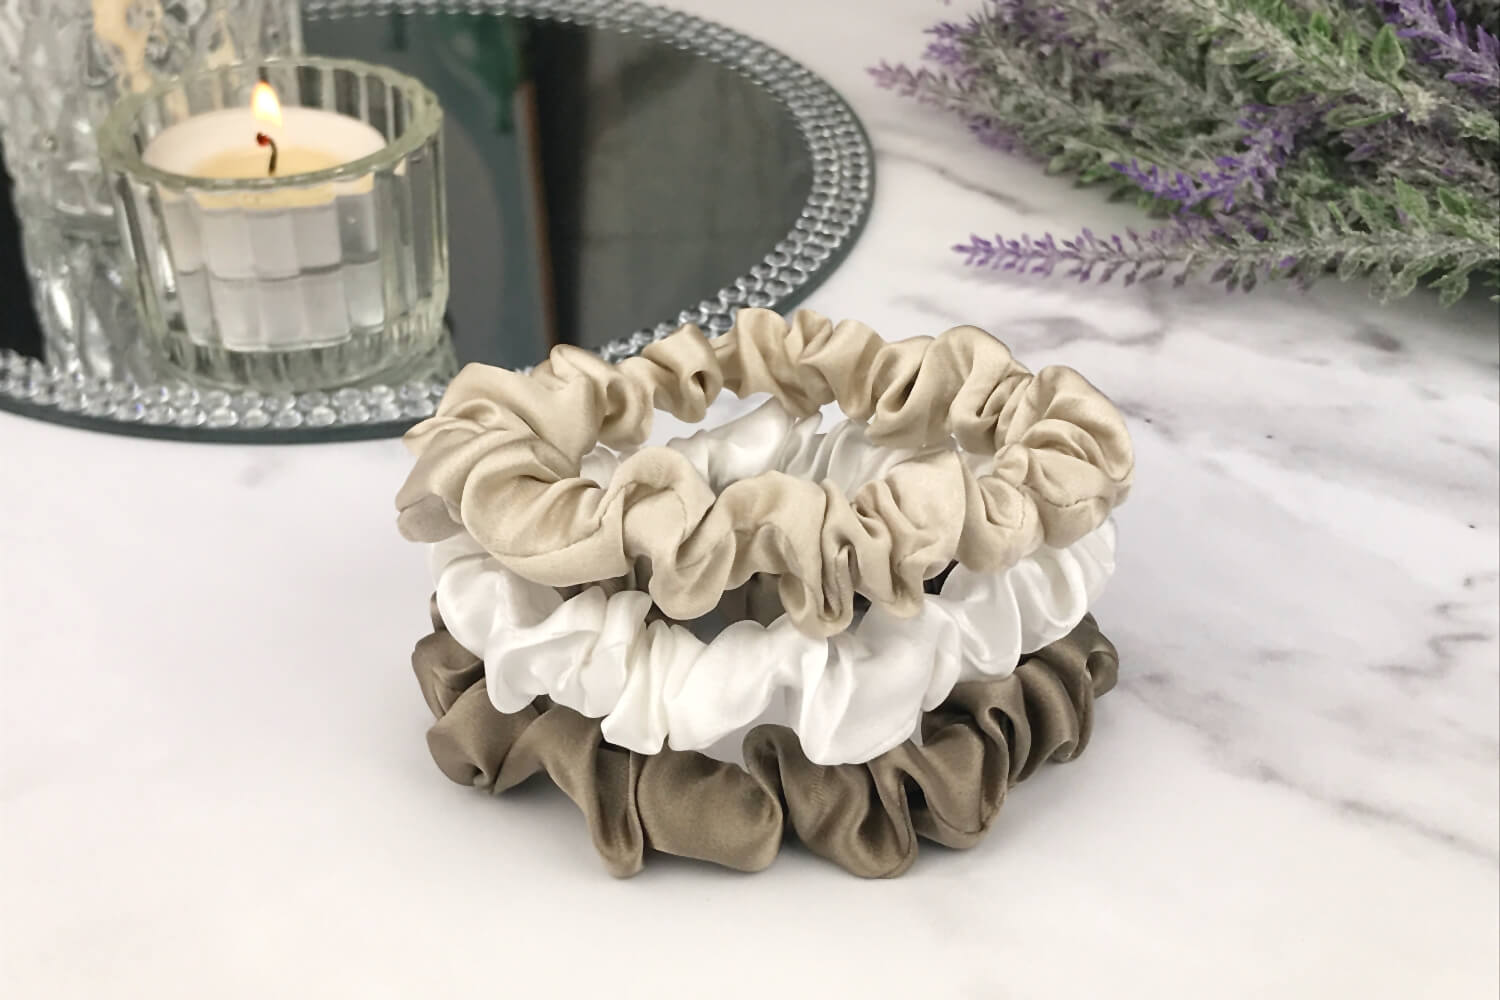 Celestial Silk skinny dark taupe ivory and taupe silk scrunchies stacked on marble counter with lavender plant and a candle in the background